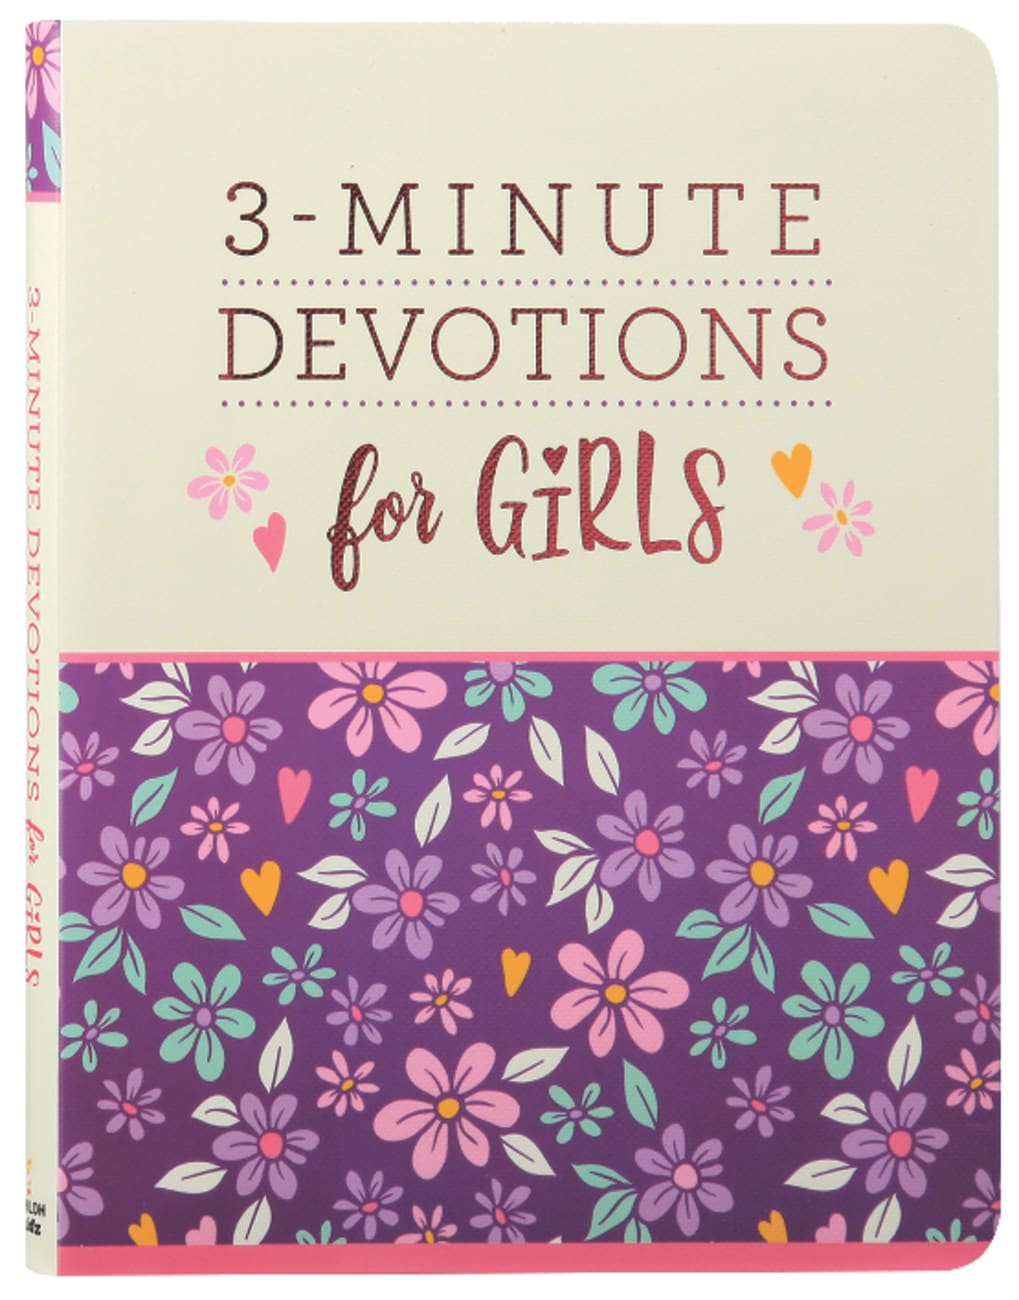 3-Minute Devotions For Girls (3 Minute Devotions Series) Paperback